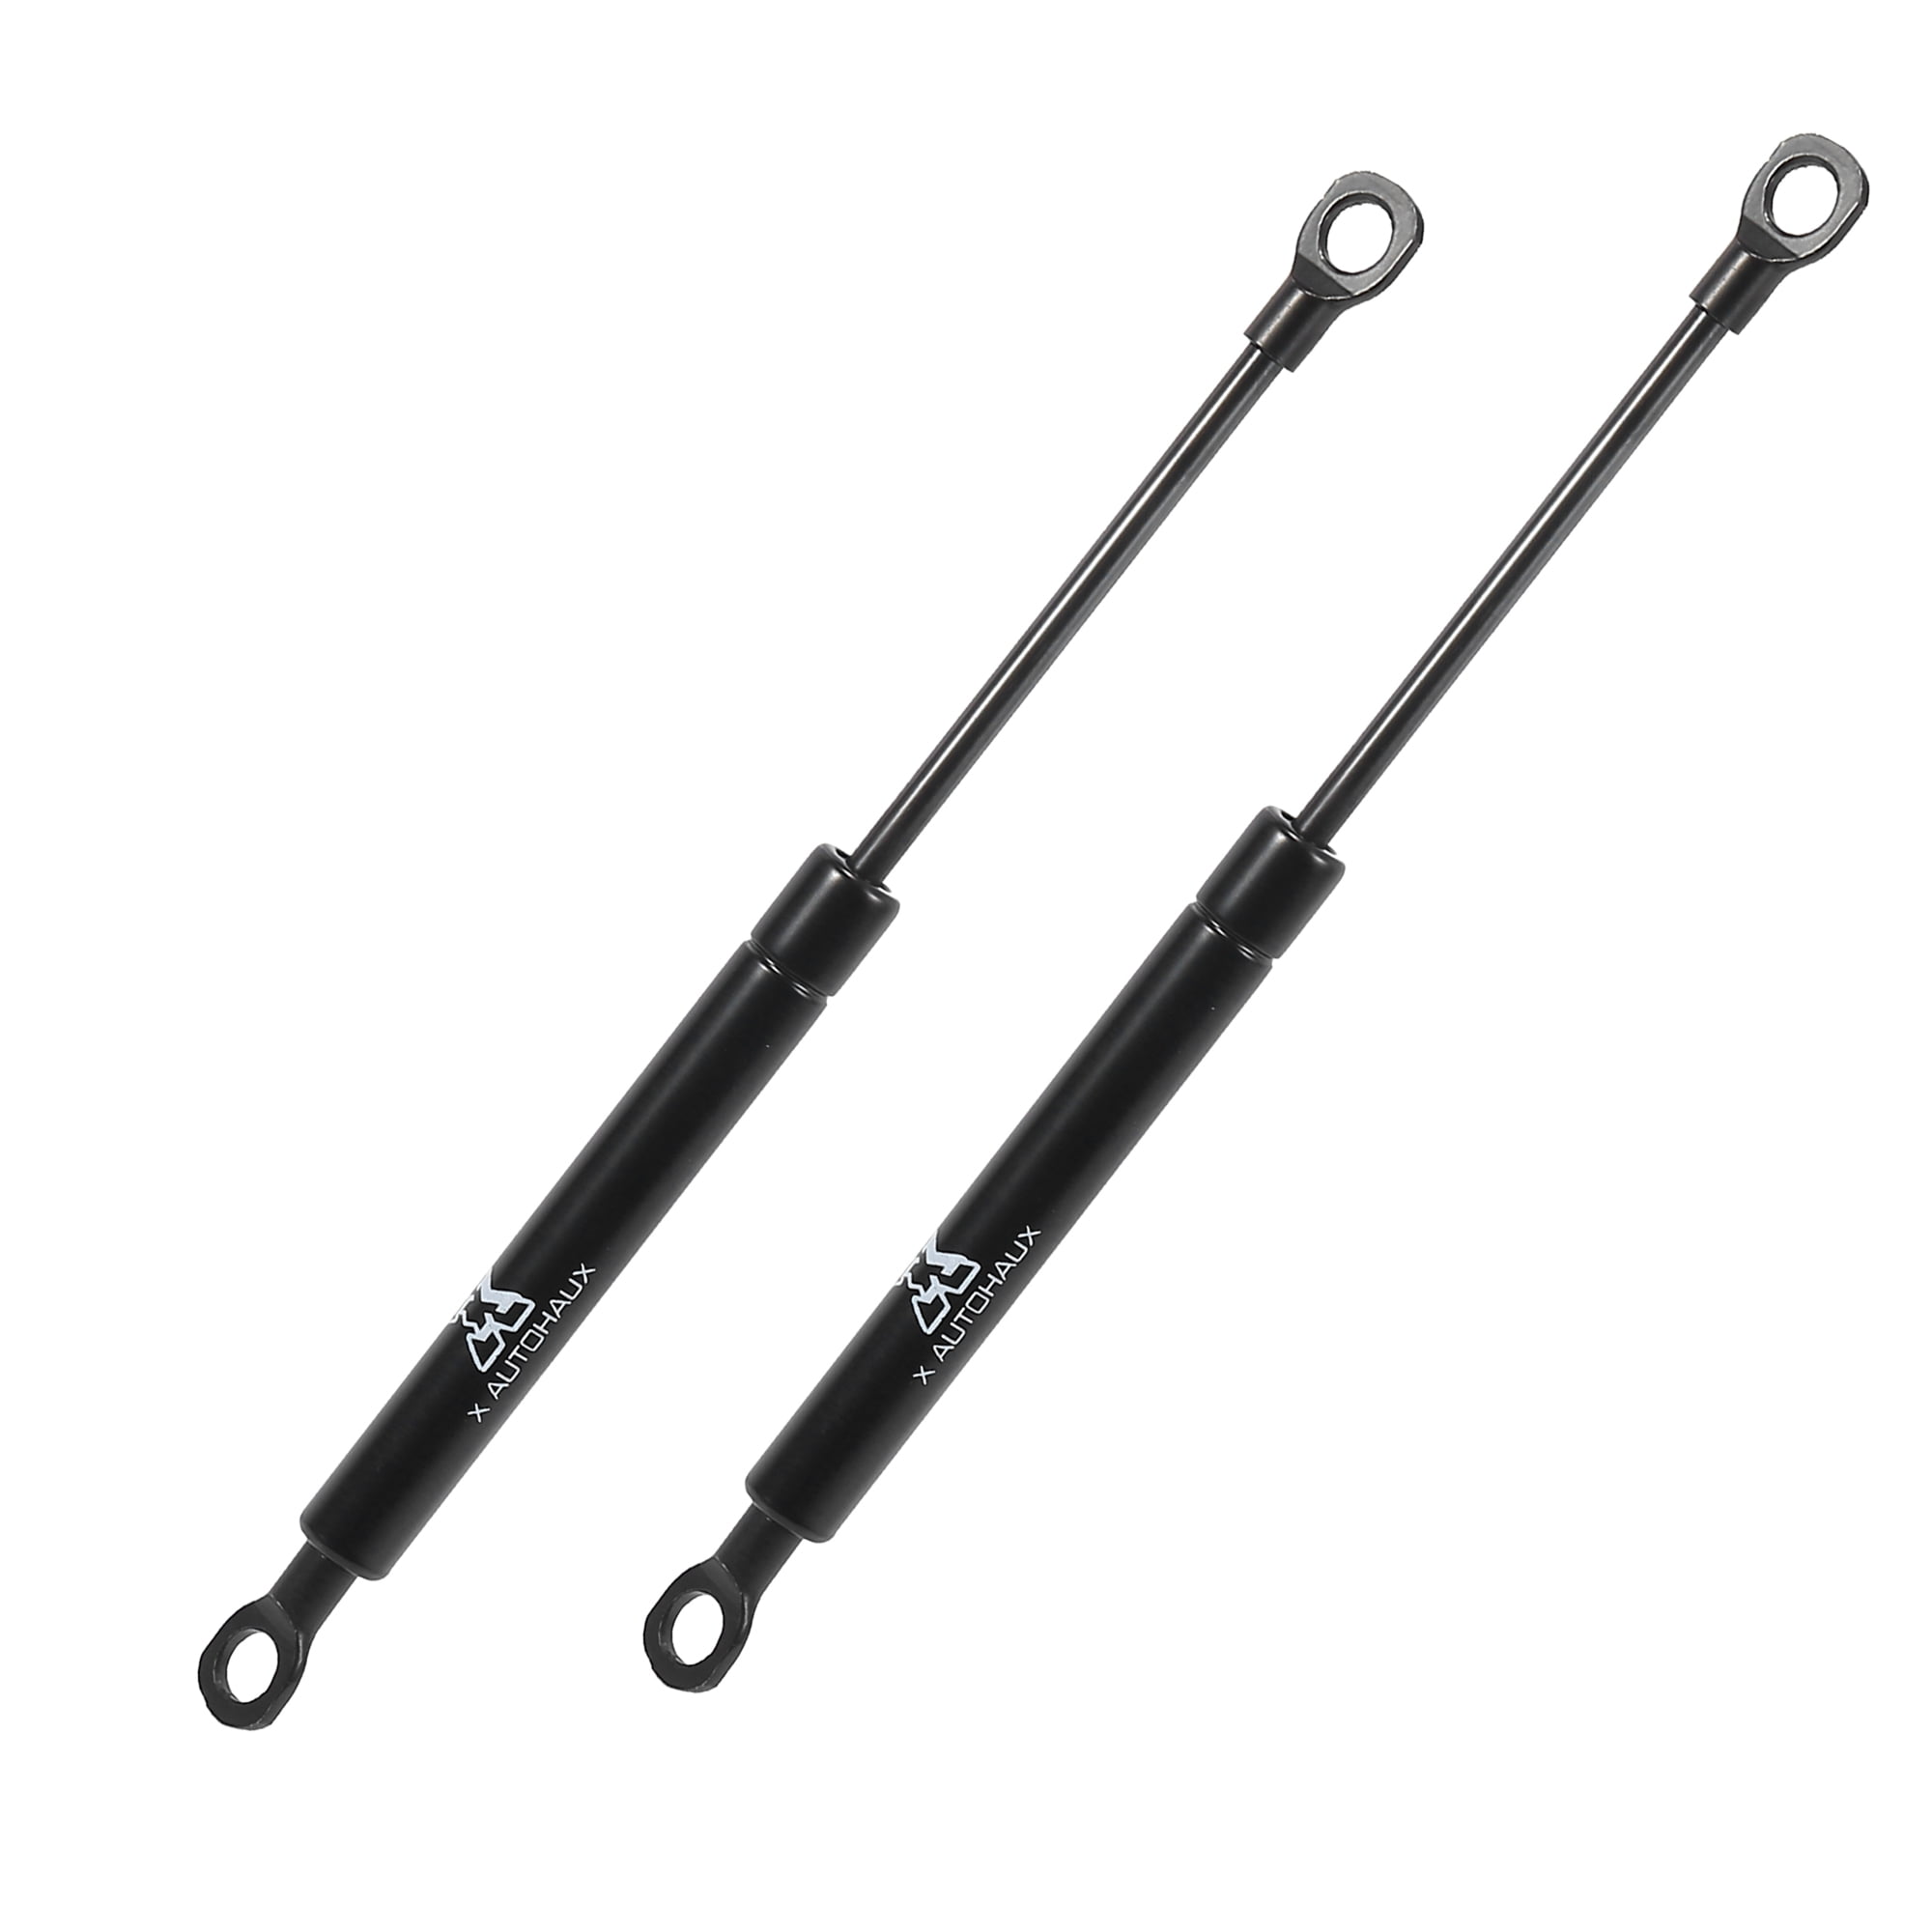 12 Inch 30 Lbs/134N Gas Strut,Lift Support,Gas Shocks (4 pack